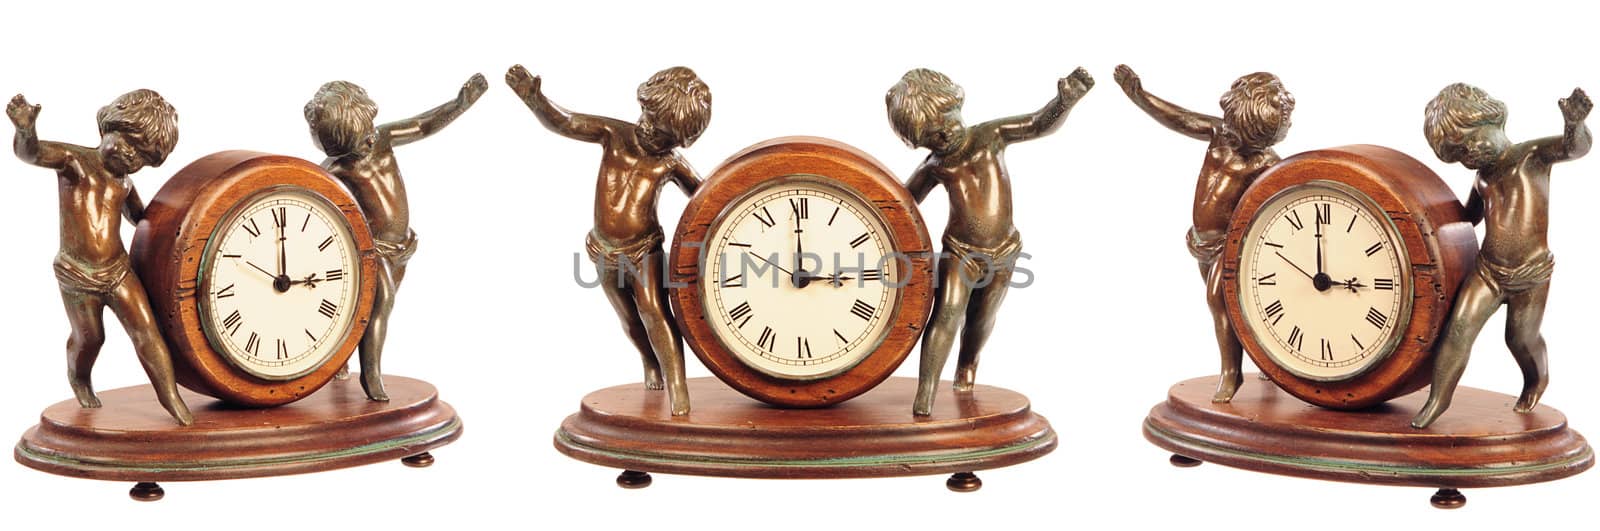 isolated old-fashioned clock by dyoma